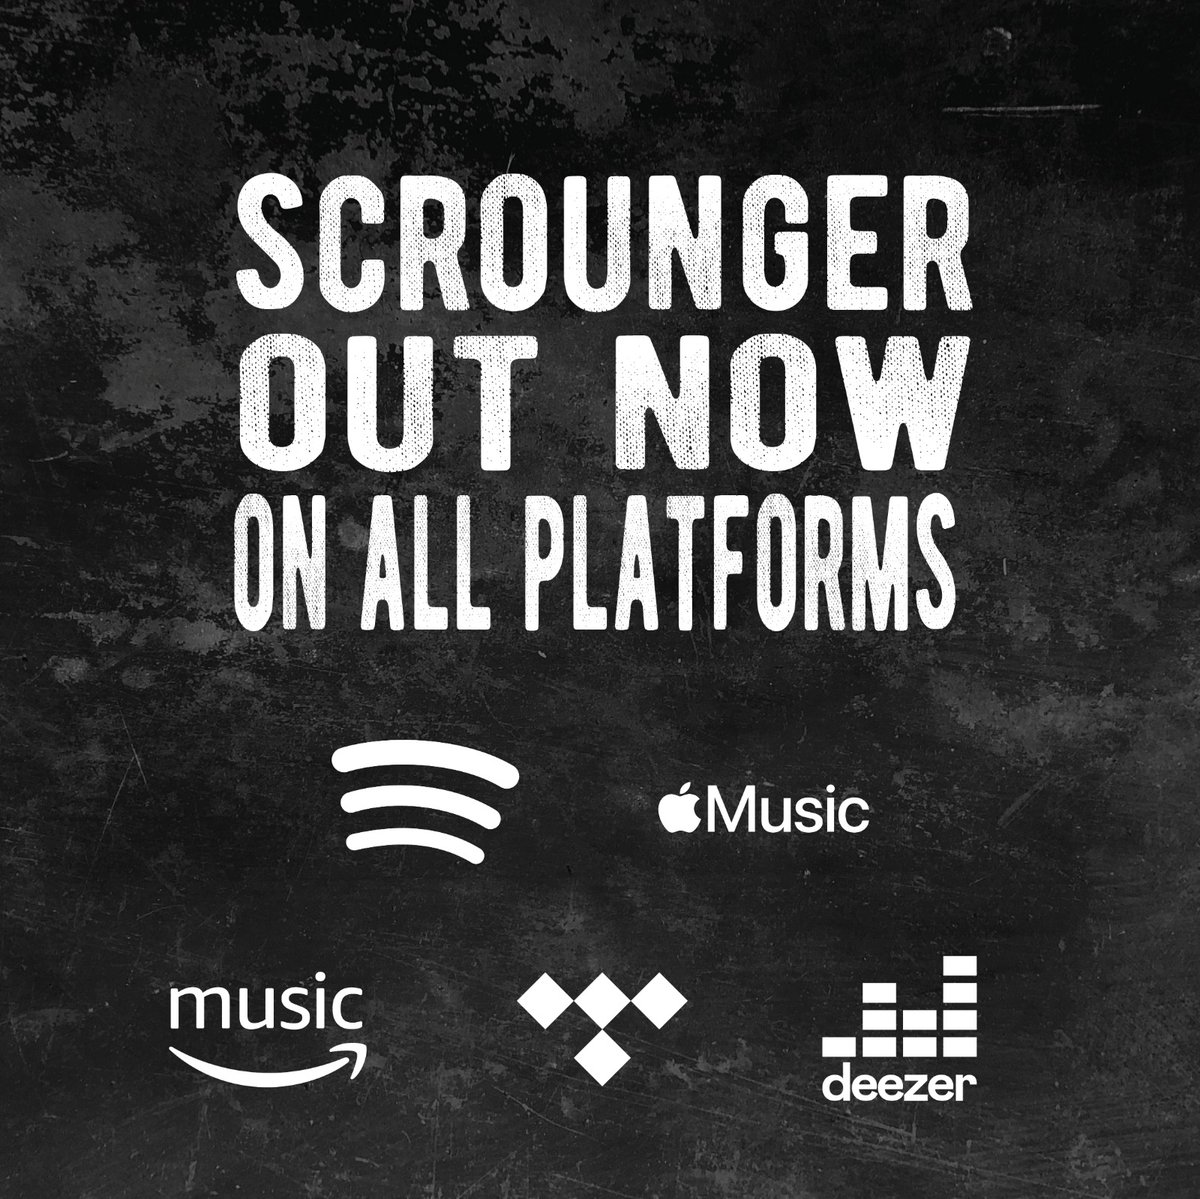 Our singles 'Scrounger' and 'Rooftop Basement' are out now! linktr.ee/54kg

#NewMusic
#NewRelease
#NowPlaying
#SongOfTheDay
#StreamNow
#Spotify
#AppleMusic
#AmazonMusic
#IndependentArtist
#SheffieldMusic
#UKMusic
#IndieMusic
#AlternativeMusic
#RockMusic
#ListenNow